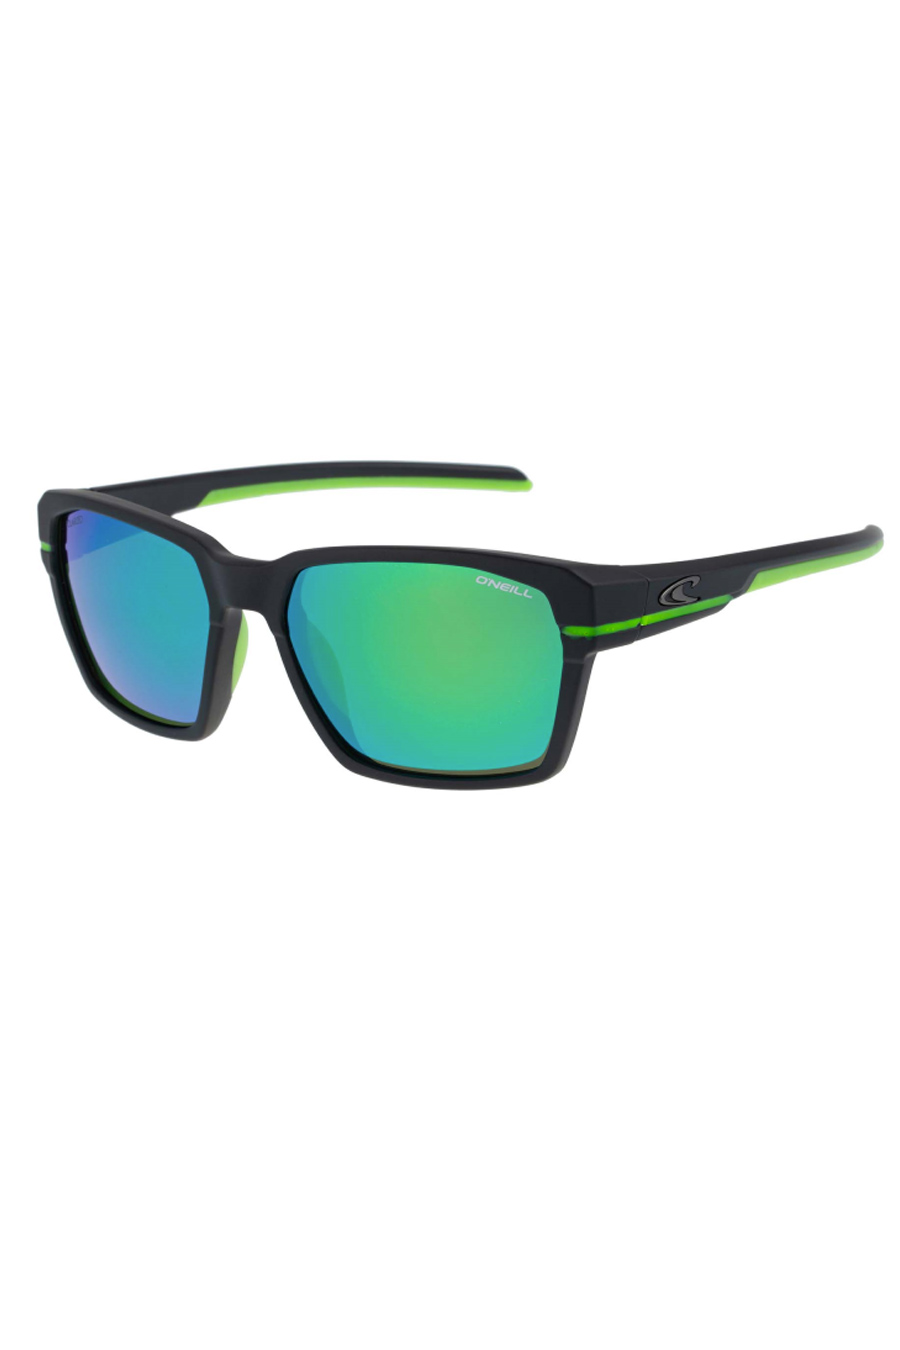 Saulesbrilles ONEILL ONS-9027-20-104P